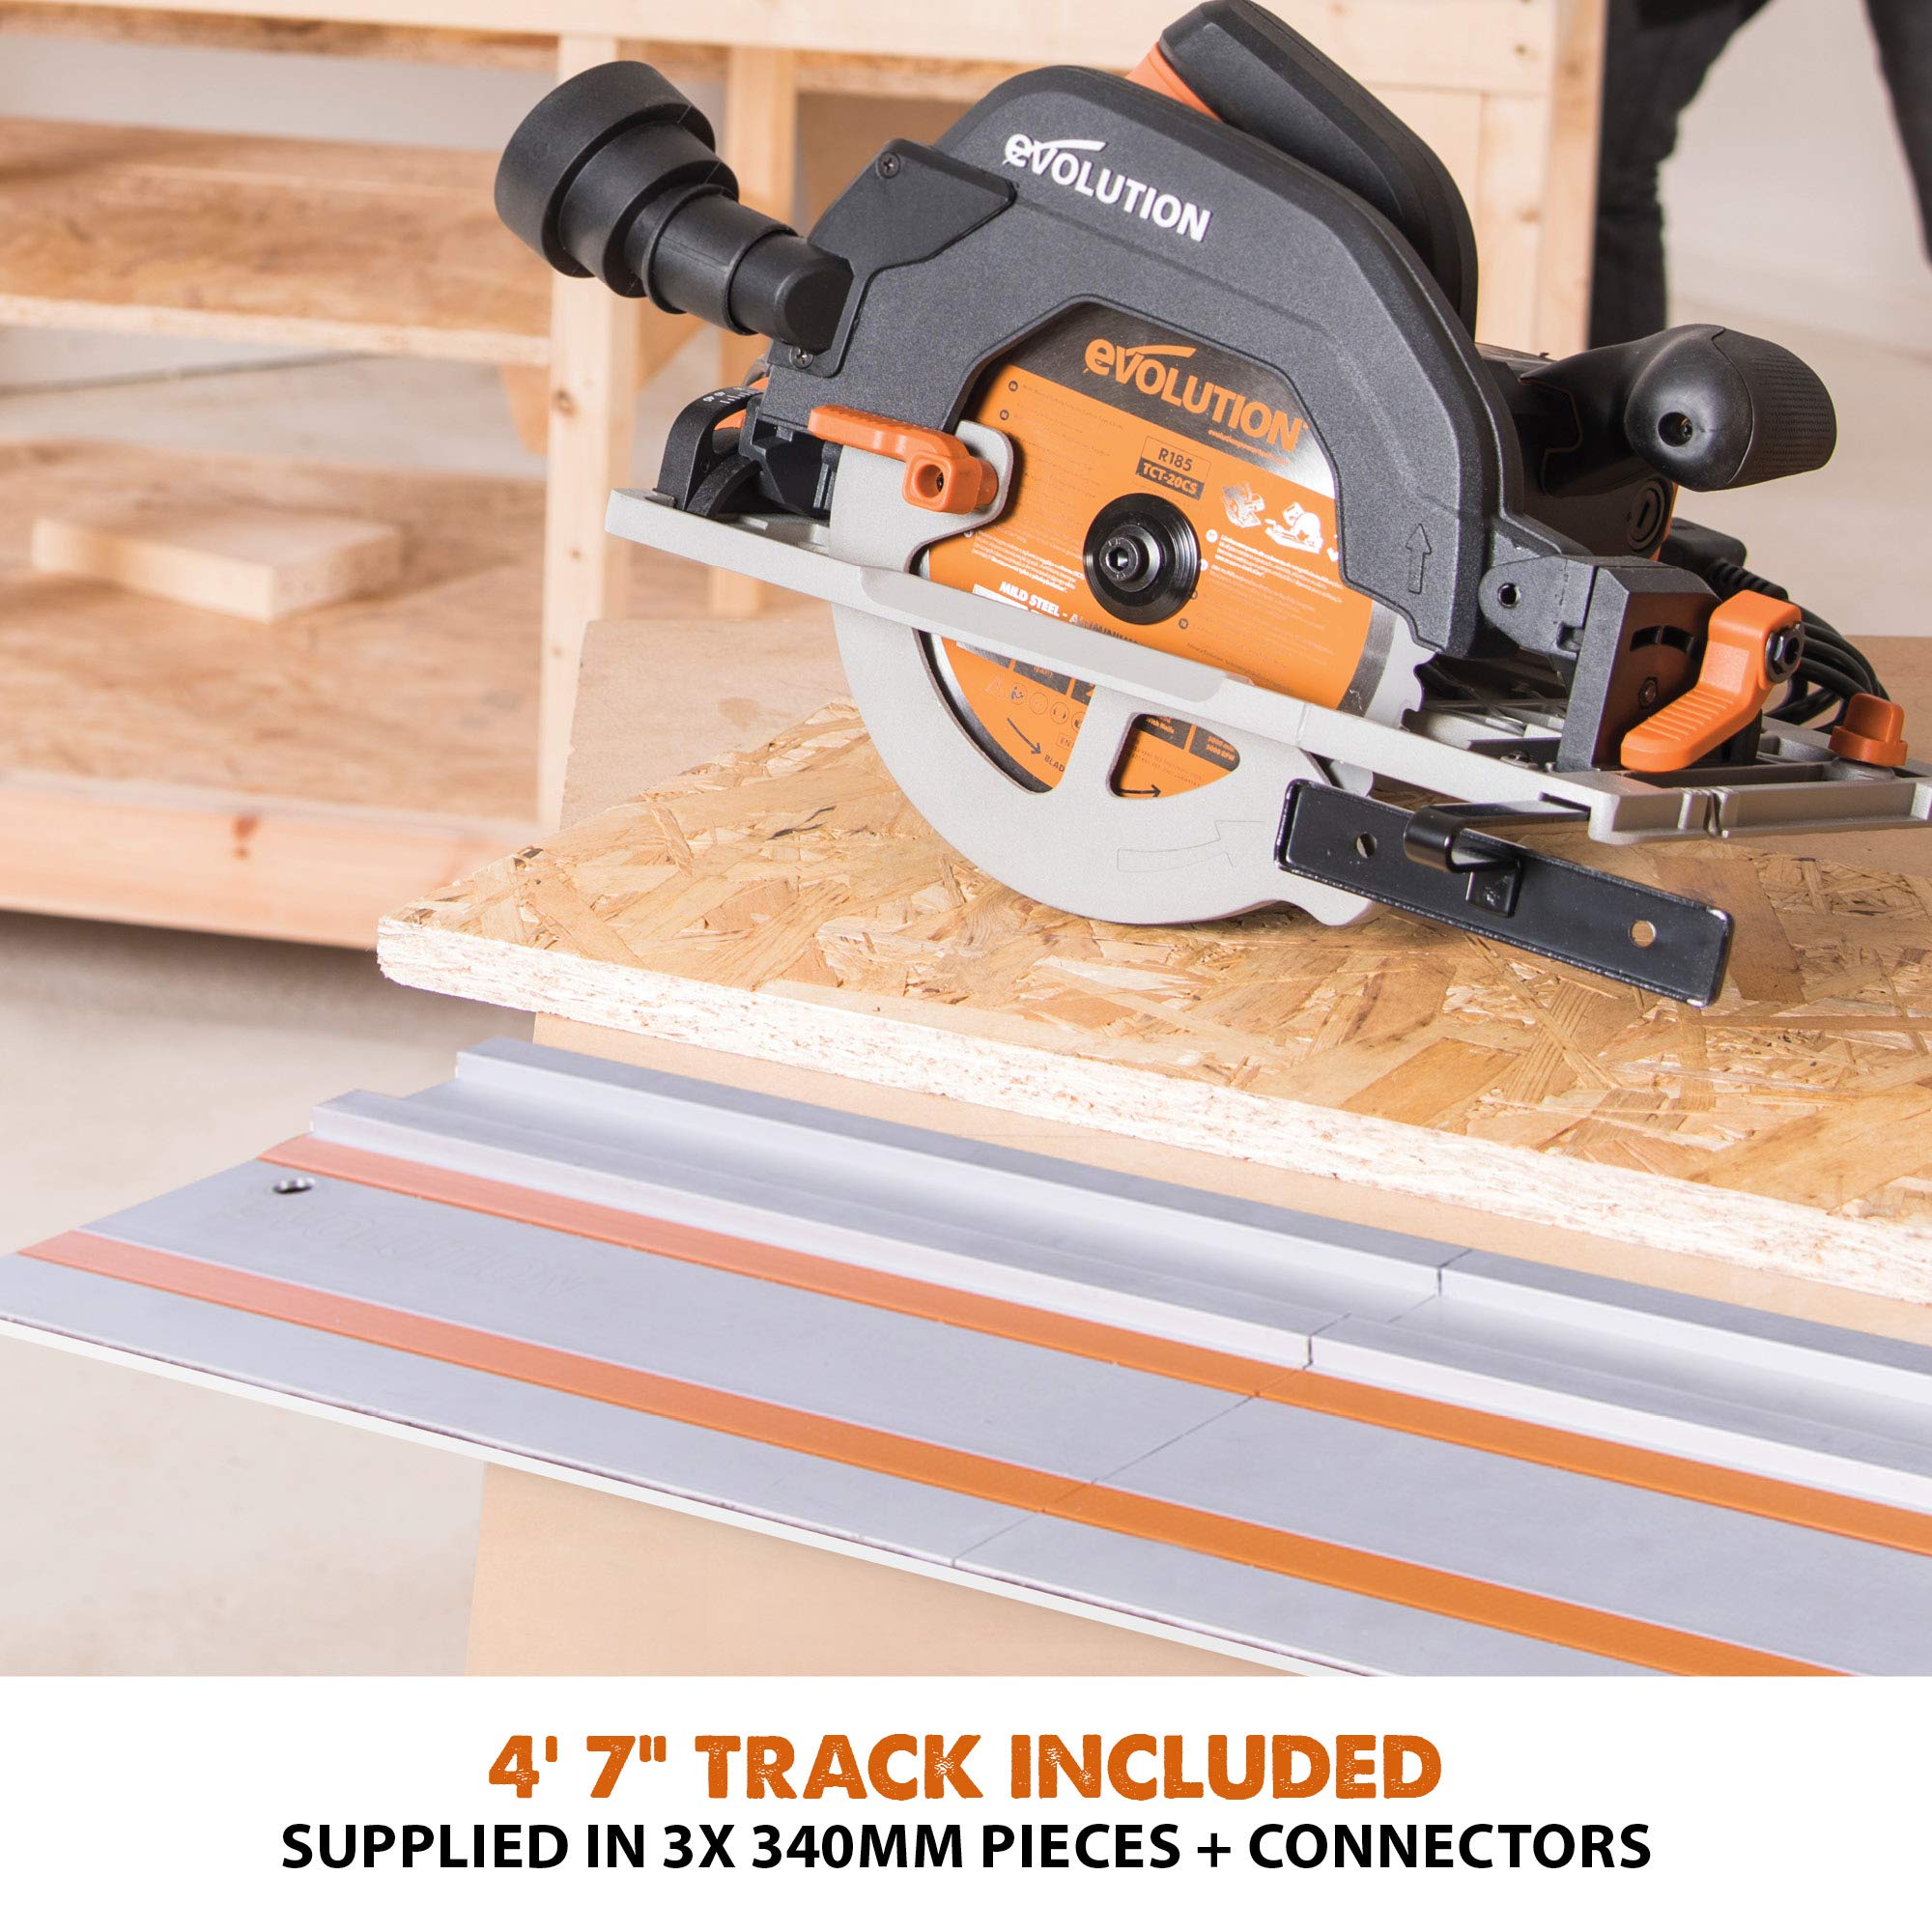 Evolution Power Tools R185CCSX Multi-Material Circular Track Saw Kit with 40" Track Included, TCT Blade Included, Cuts Wood, Plastic, Metal & More, 7-1/4 Inch